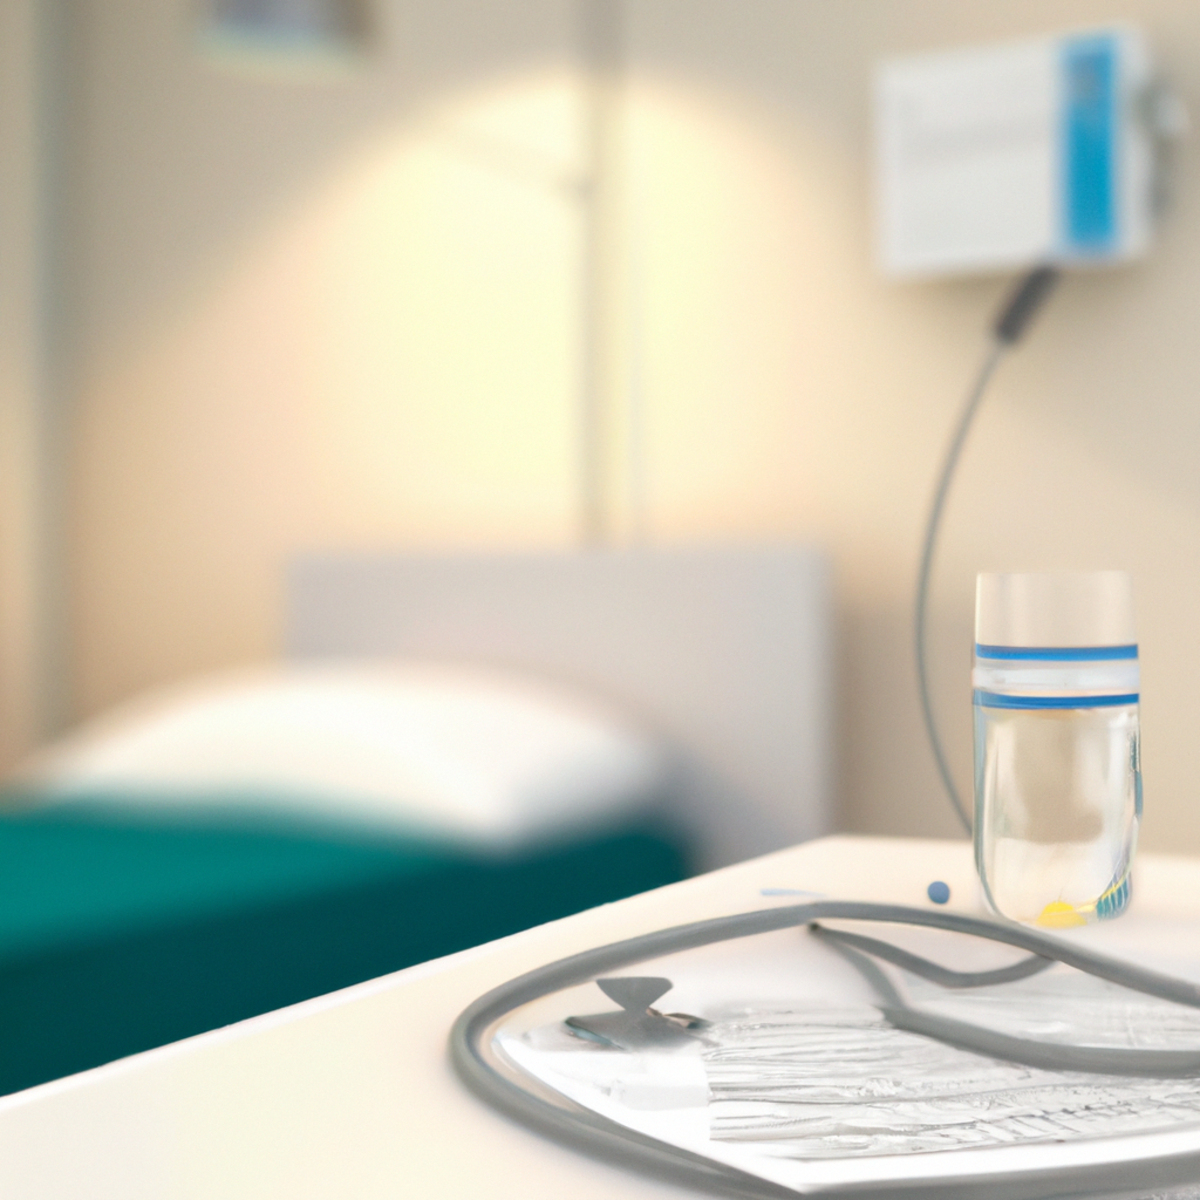 Symbolic hospital room scene with stethoscope, notepad, and medical equipment, representing diagnosis and treatment of Rasmussen's Encephalitis.